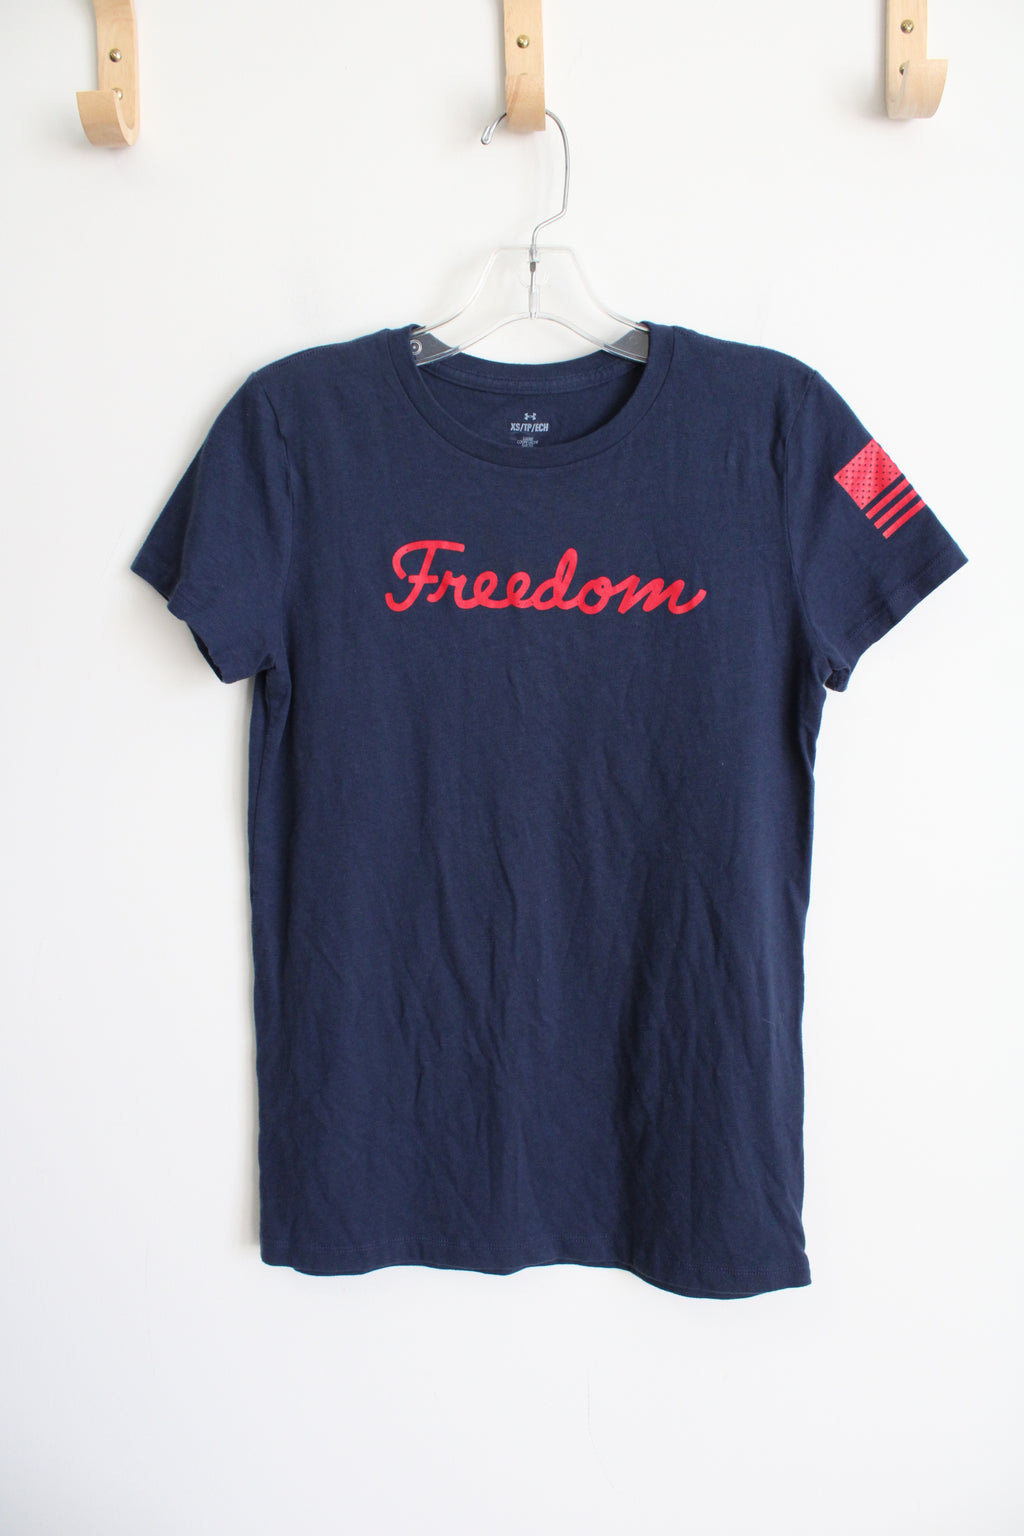 Under Armour Freedom Blue Tee | XS